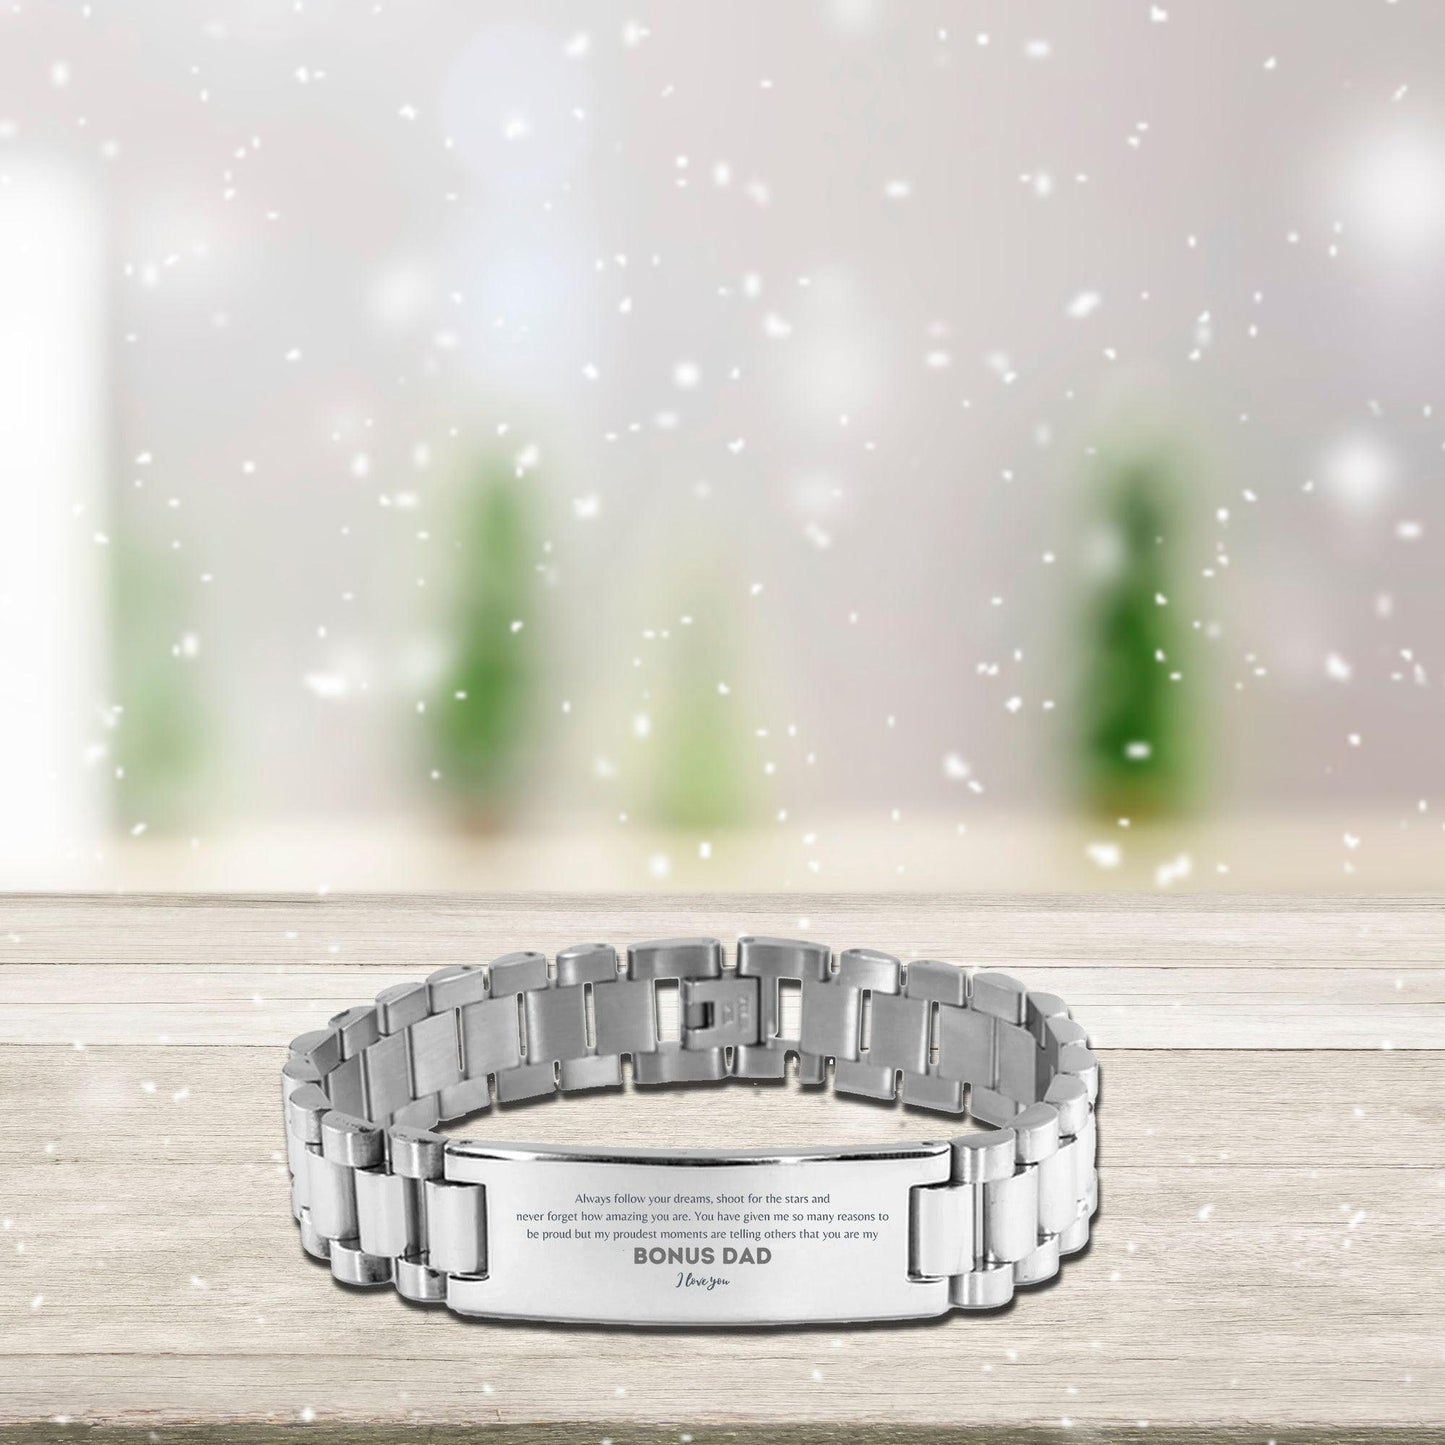 Bonus Dad Engraved Ladder Stainless Steel Bracelet Always follow your dreams, never forget how amazing you are, Birthday Christmas Gifts Jewelry - Mallard Moon Gift Shop